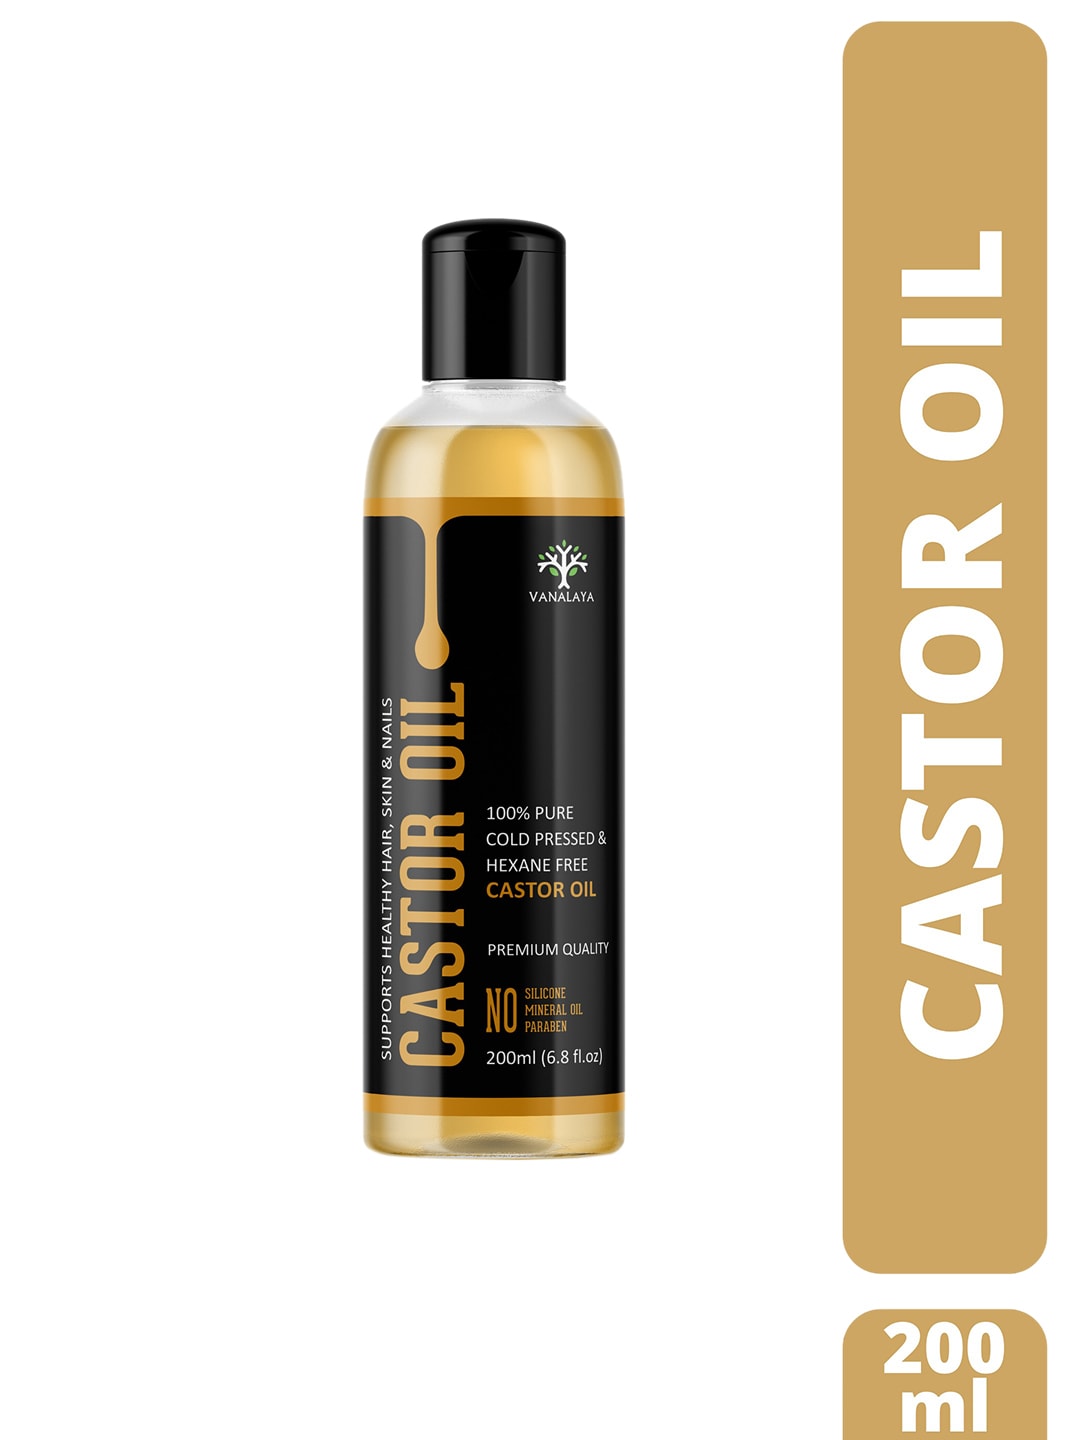 VANALAYA Cold Pressed Castor Oil For Hair Growth & Skin Health - 200 ml Price in India